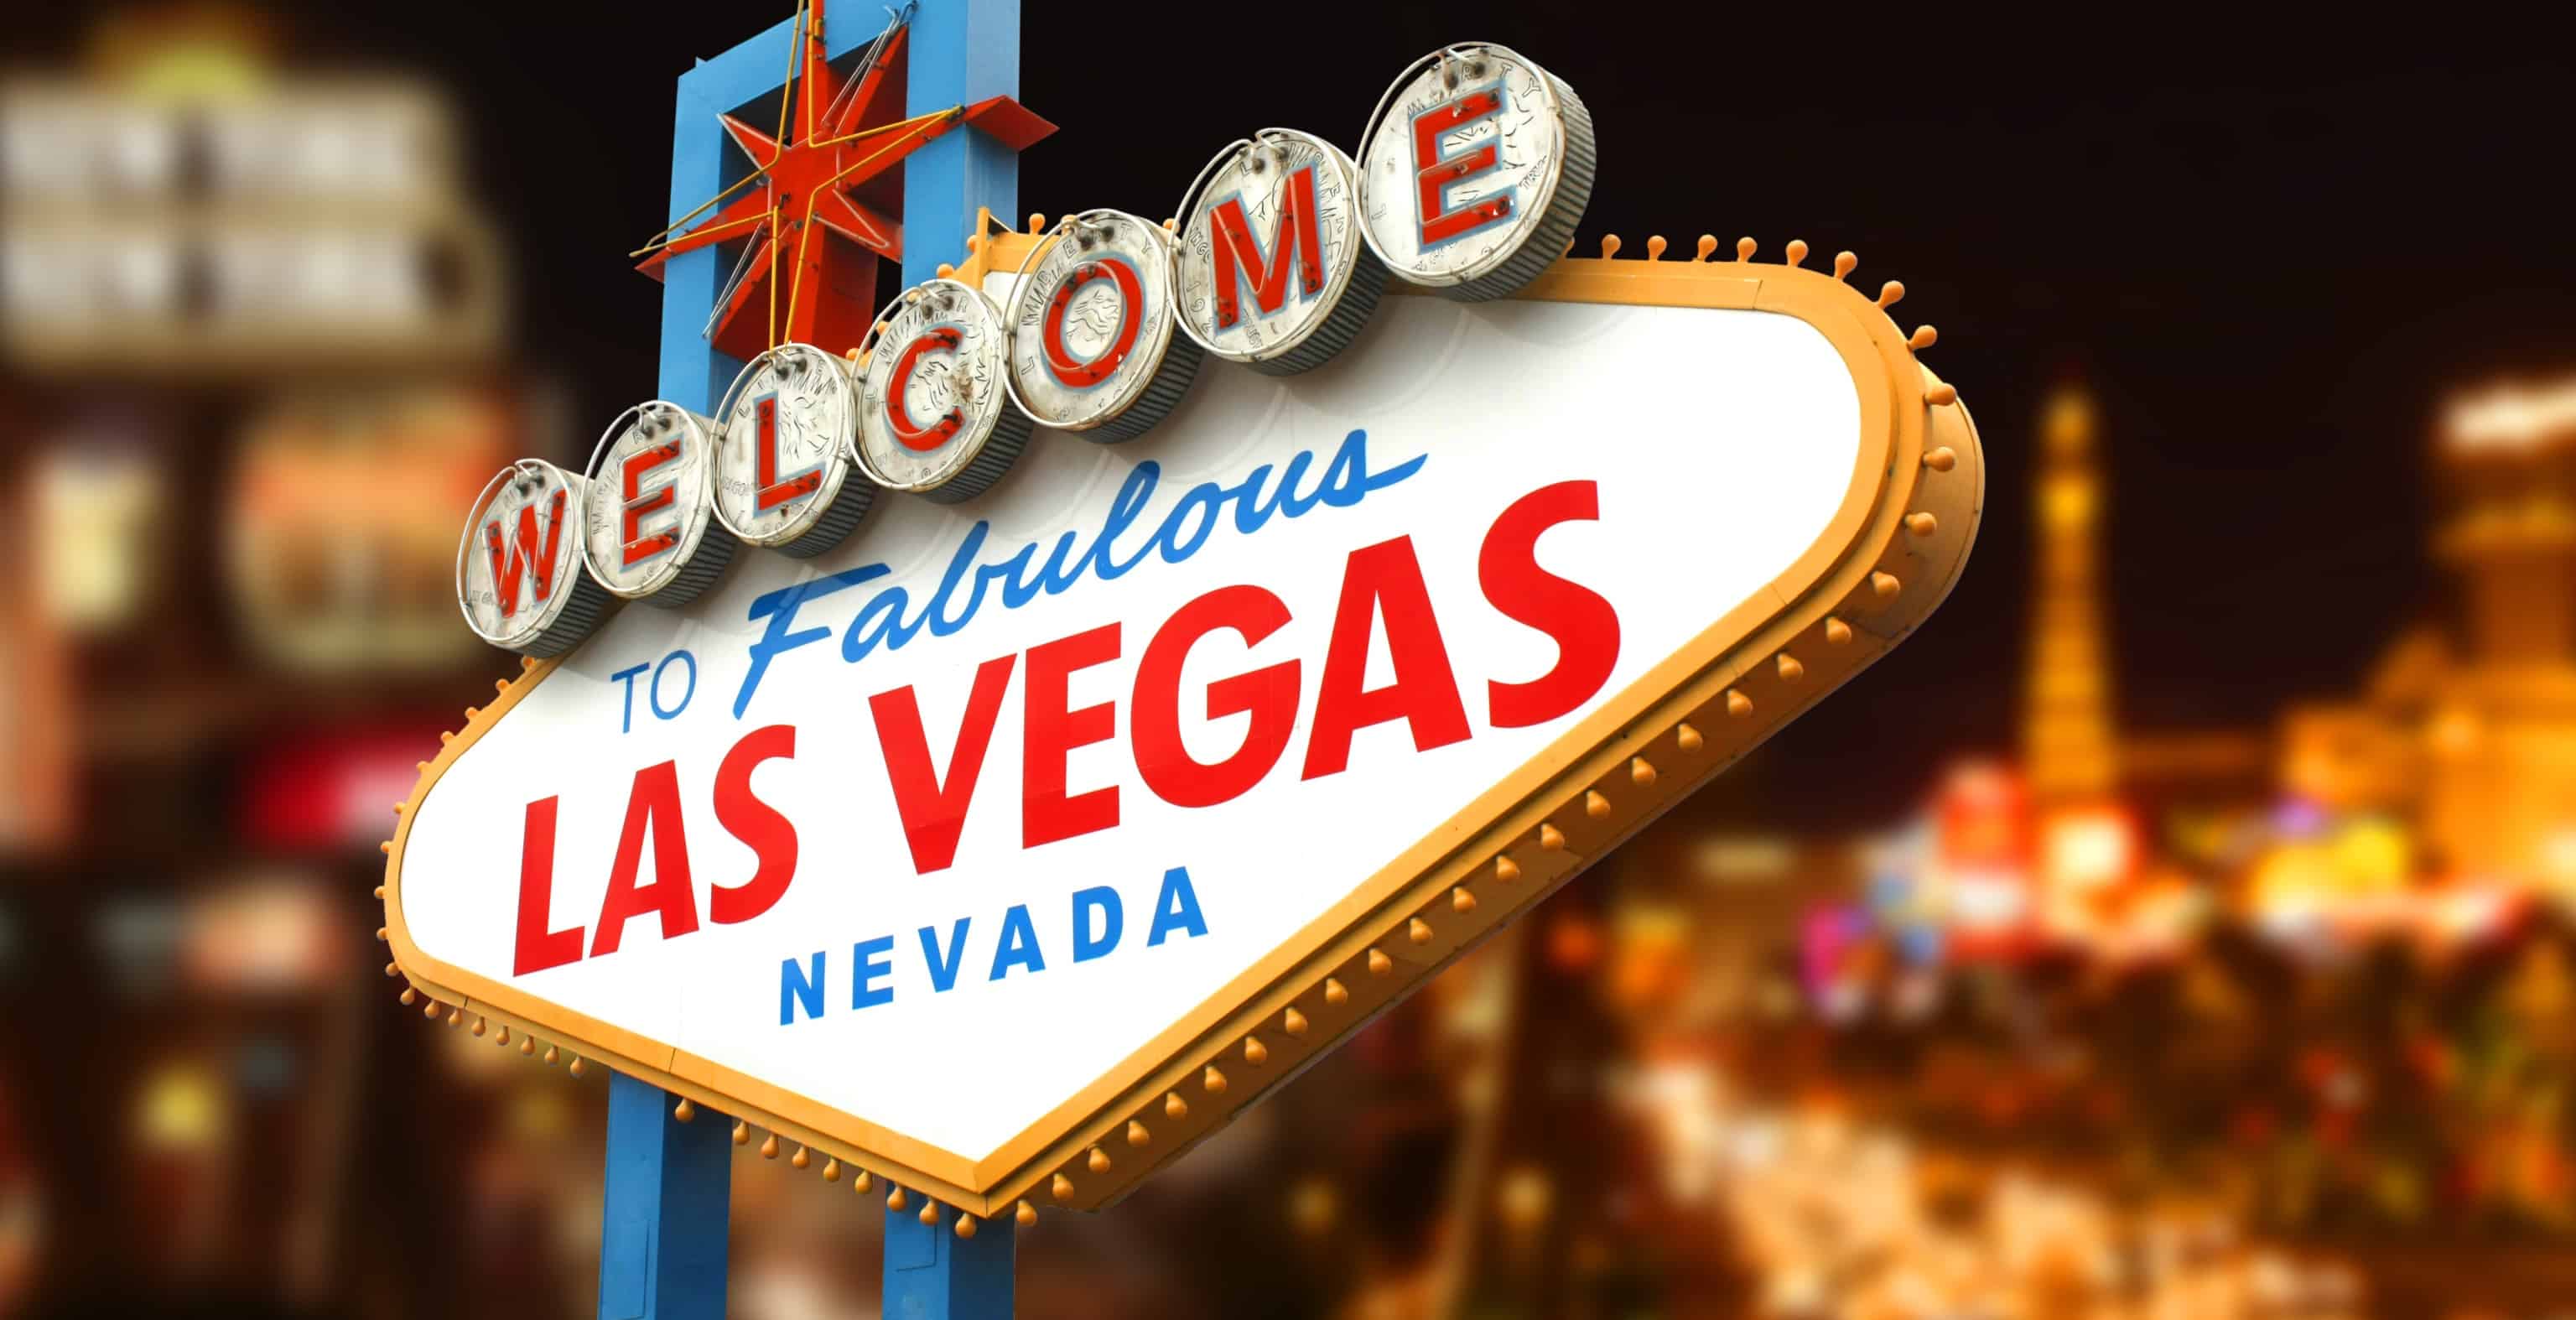 Indigenous Peoples' Day recognized at 'Welcome to Las Vegas' sign